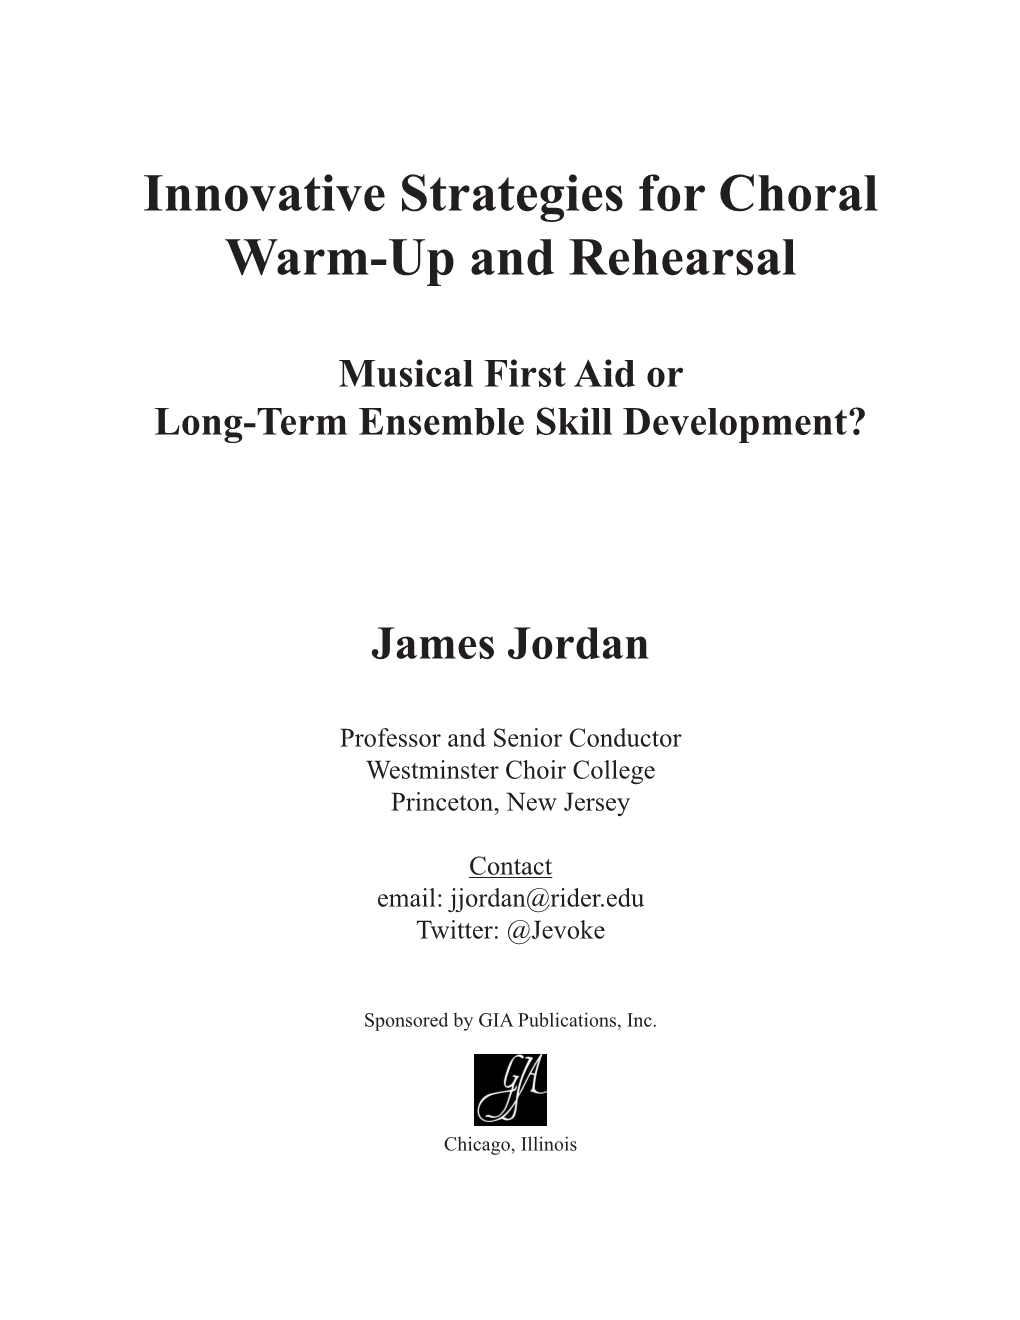 Innovative Strategies for Choral Warm-Up and Rehearsal